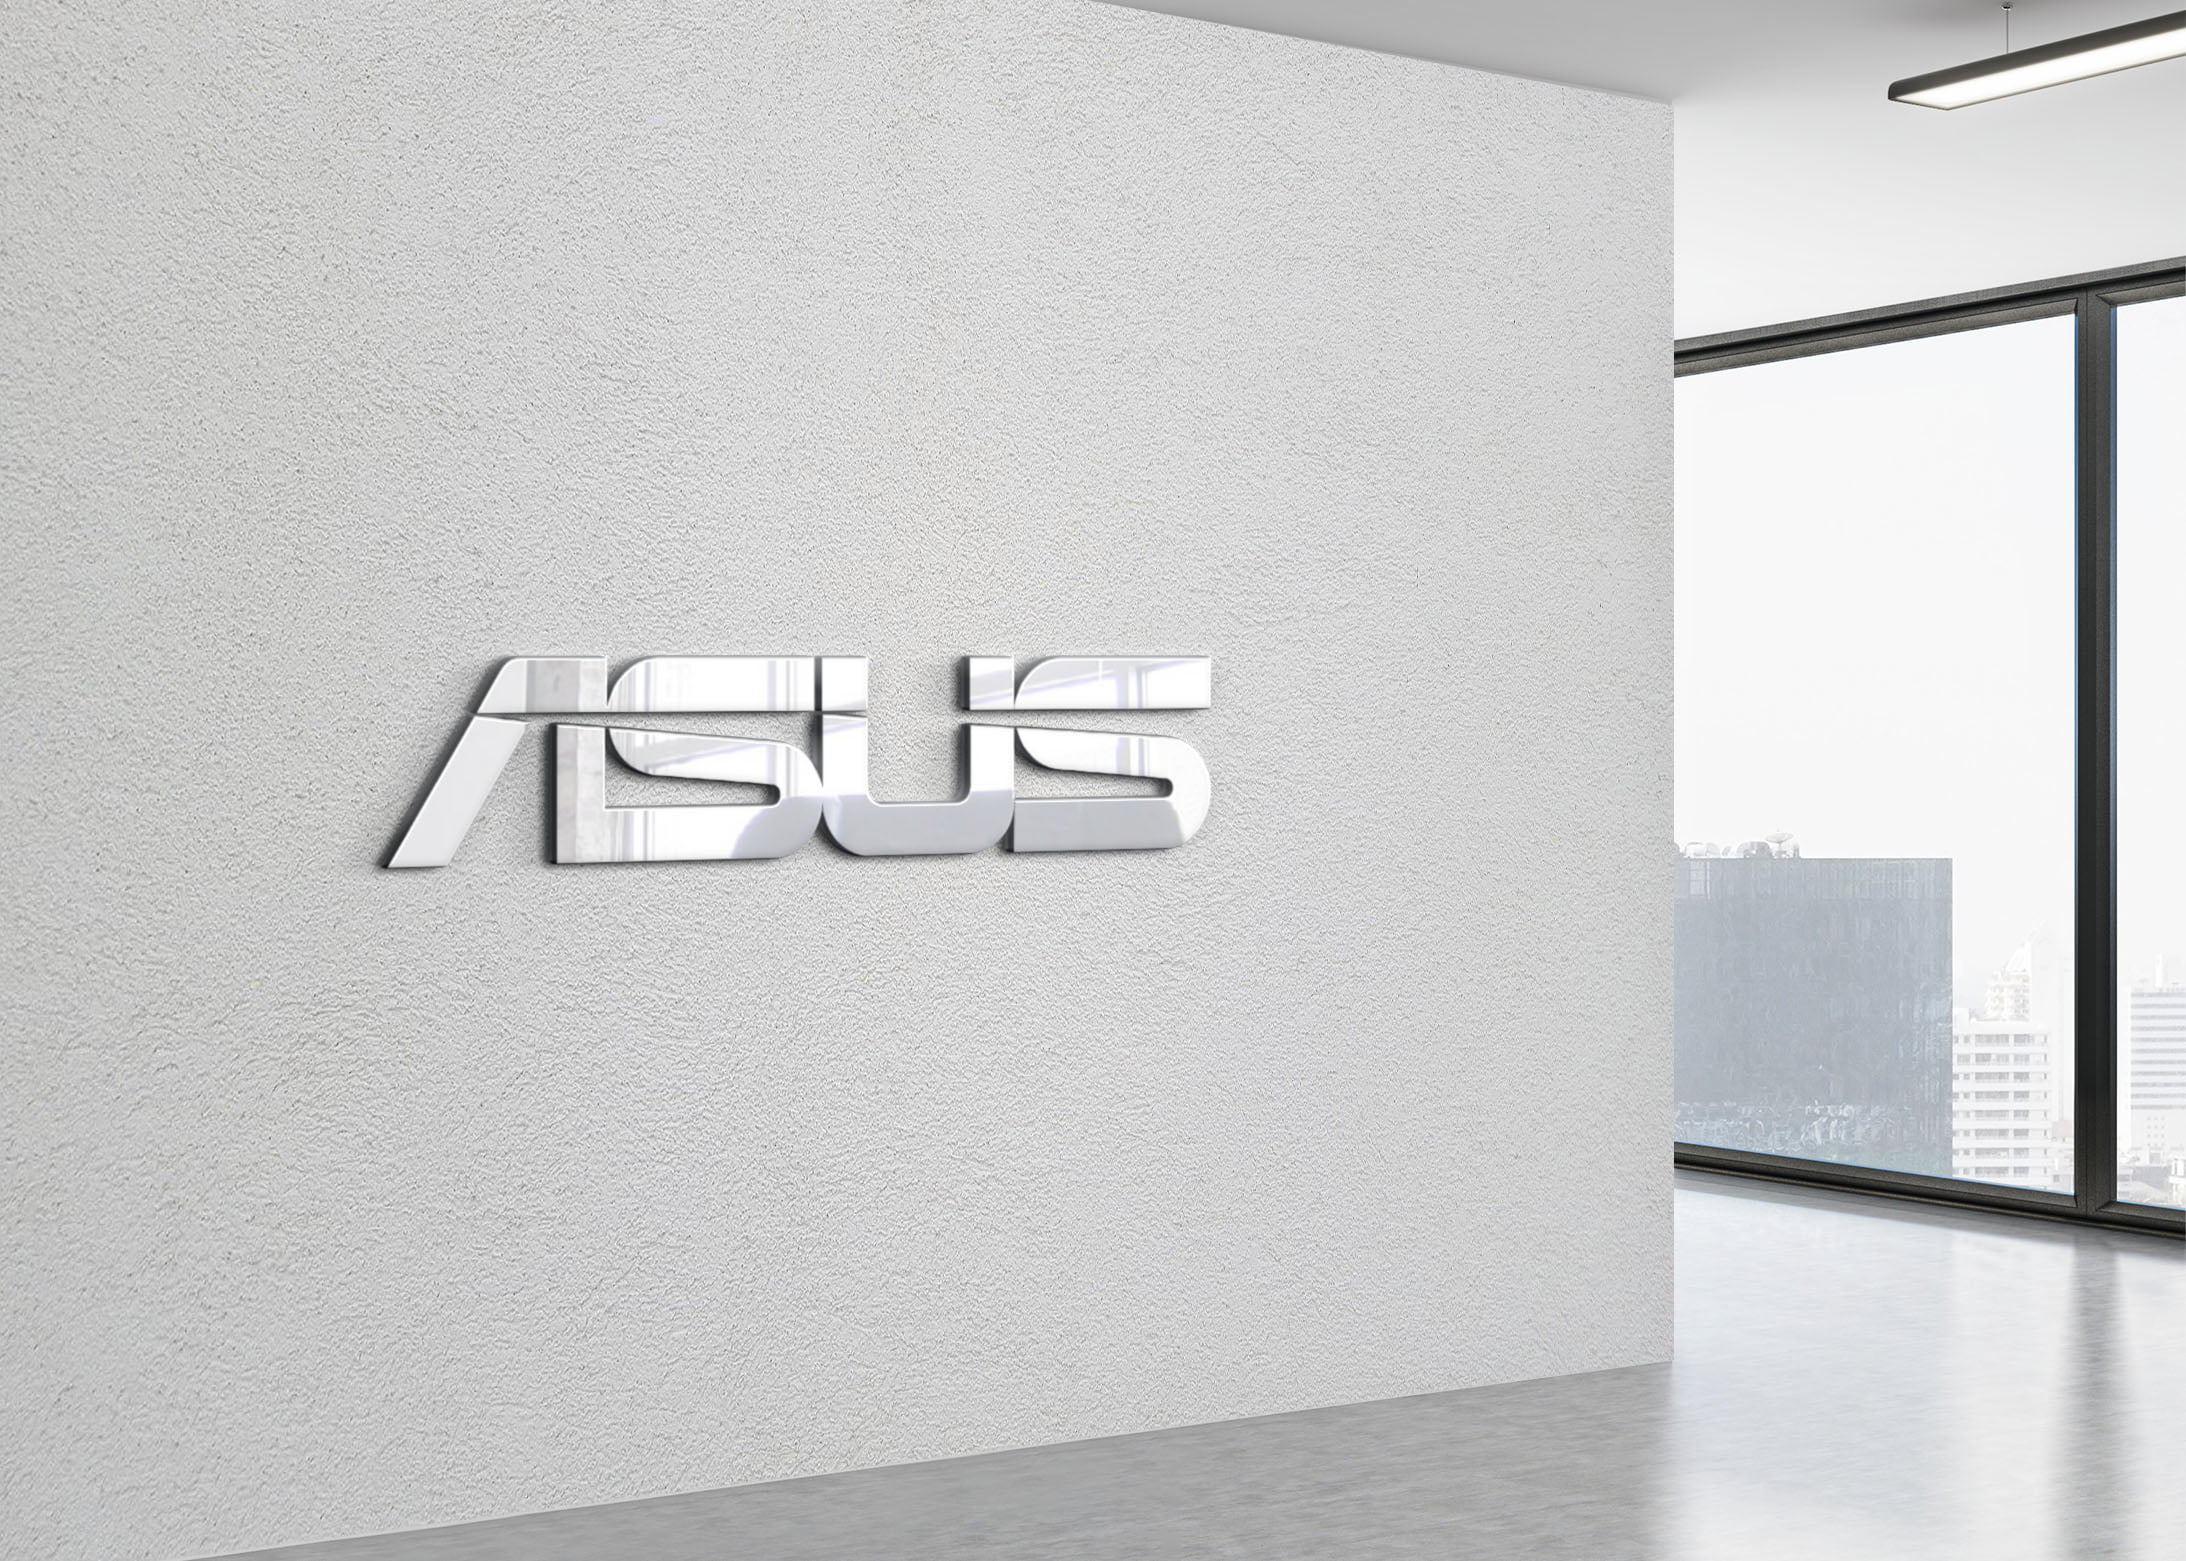 Asus Logo on 3d office wall